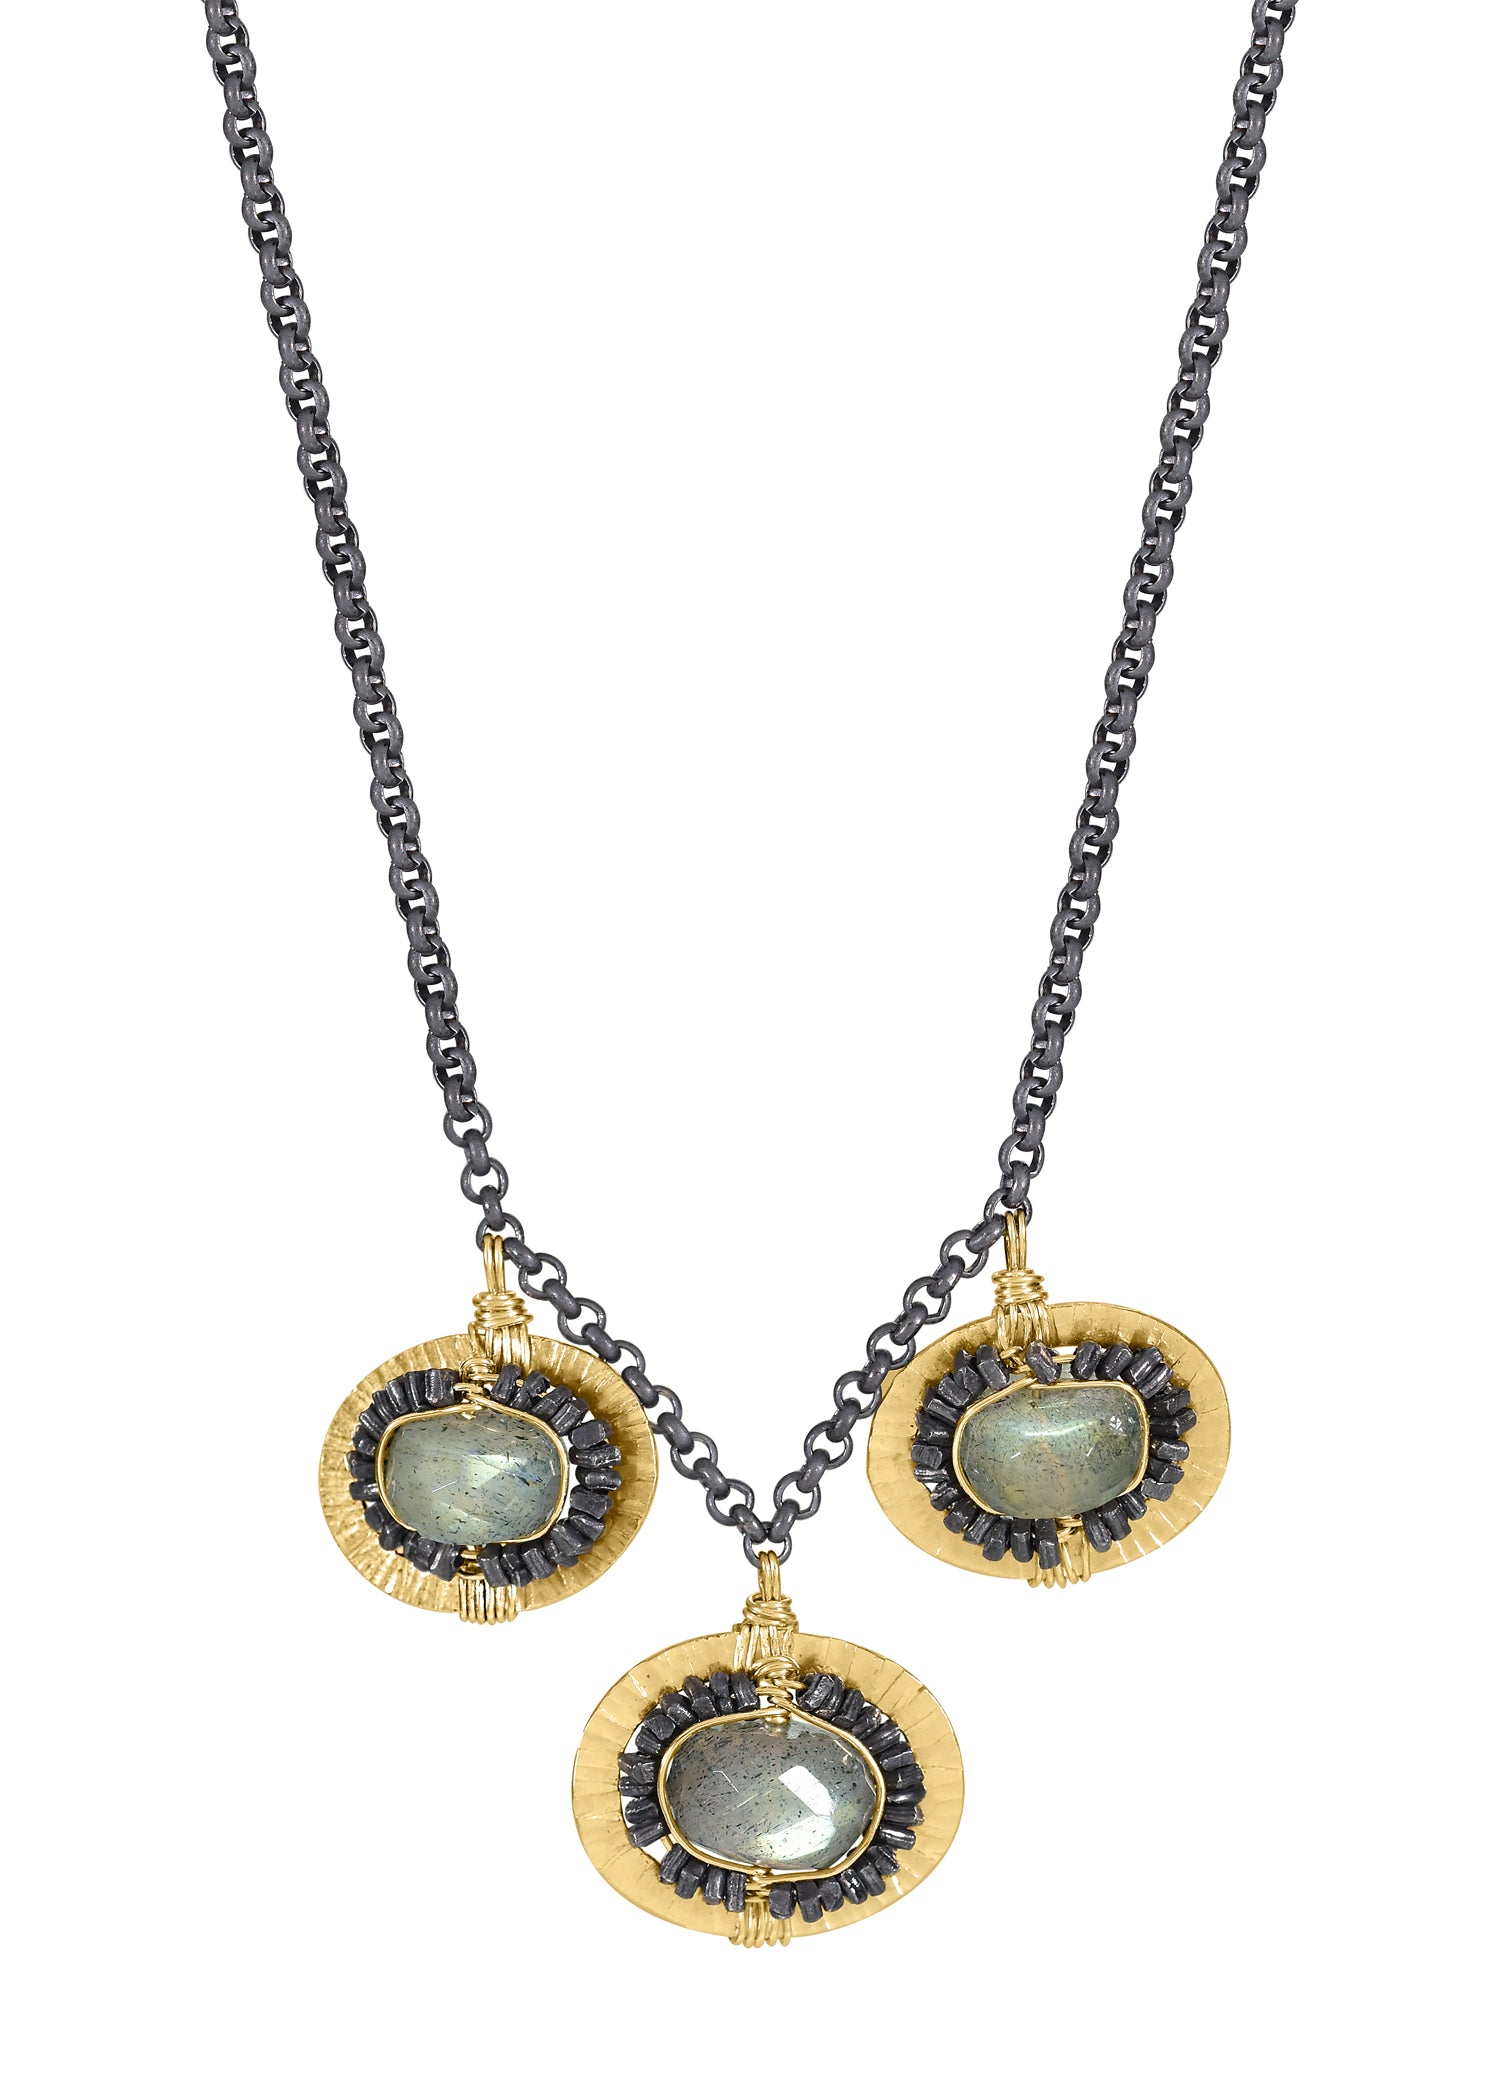 Labradorite 14k gold fill Blackened sterling silver Necklace measures 17" Pendants measure 3/8" in length and 1/2" in width (x2), 7/16" in length and 9/16" in width (x1) Handmade in our Los Angeles studio